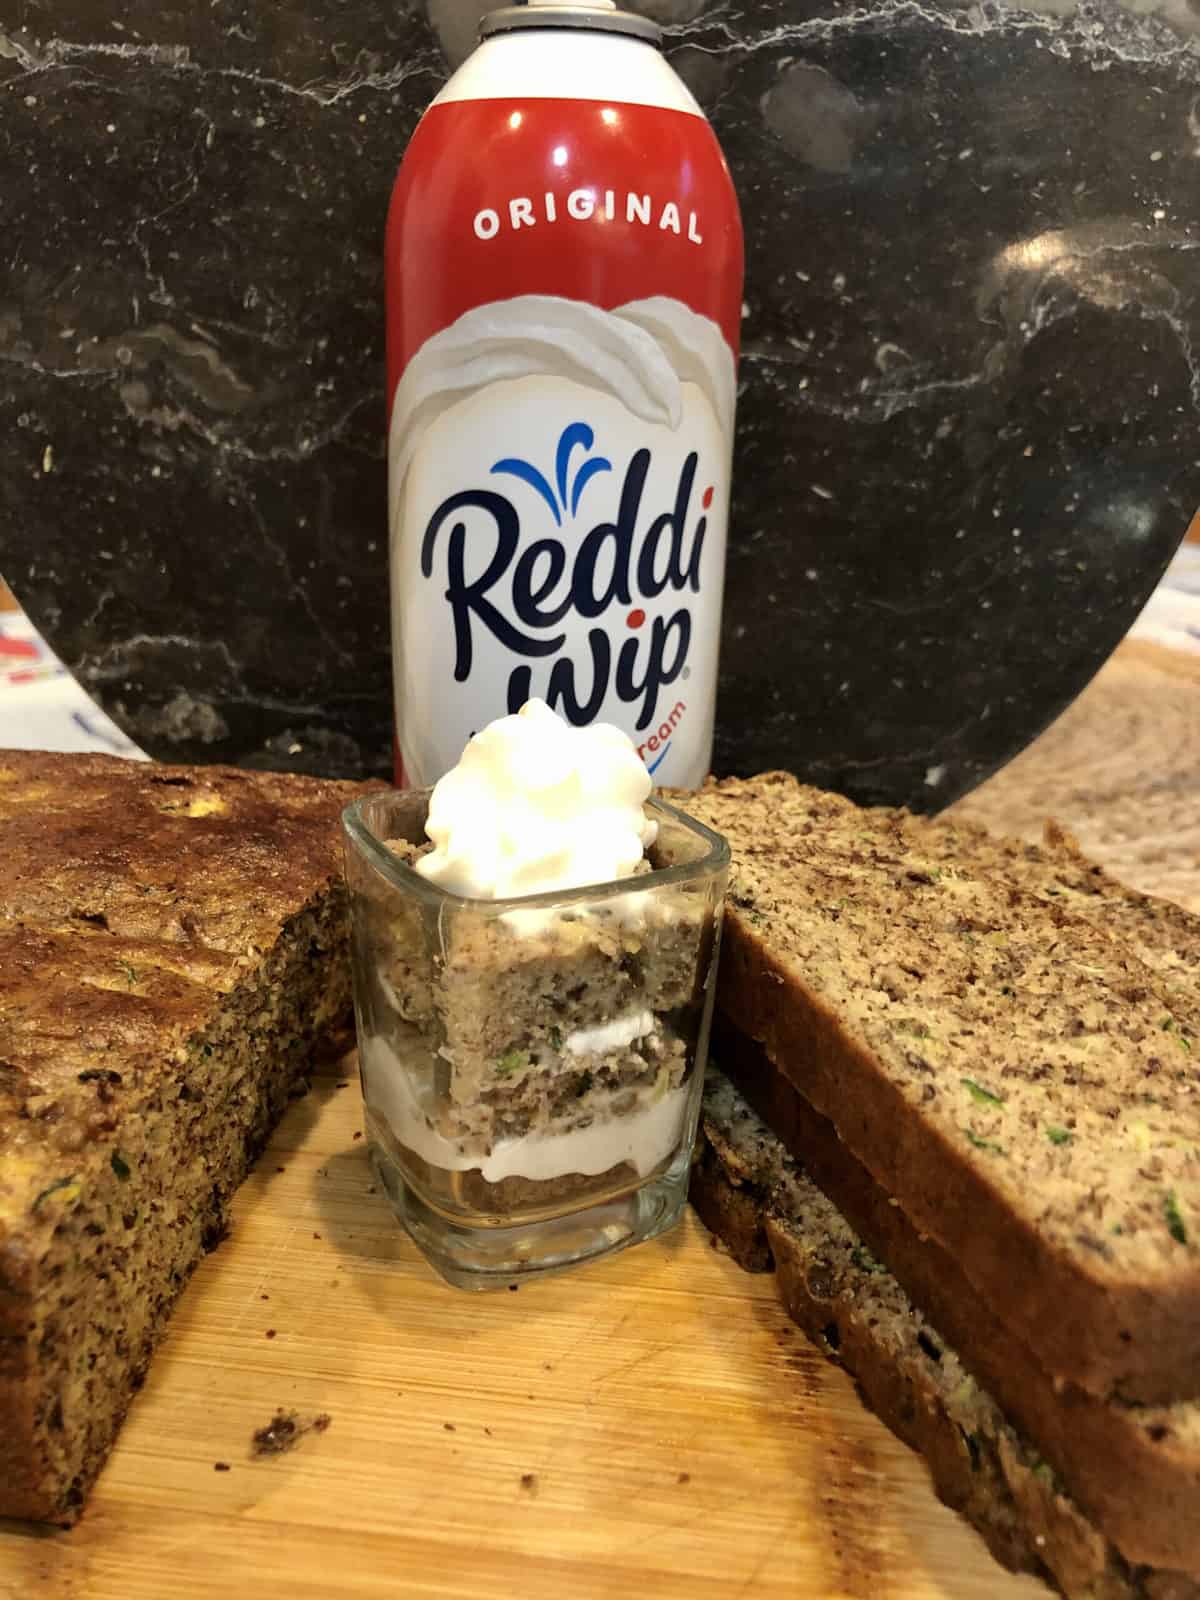 Sliced Zucchini Bread with a shot glass filled with layers of zucchini bread and whipped cream and a can of Reddi Dip